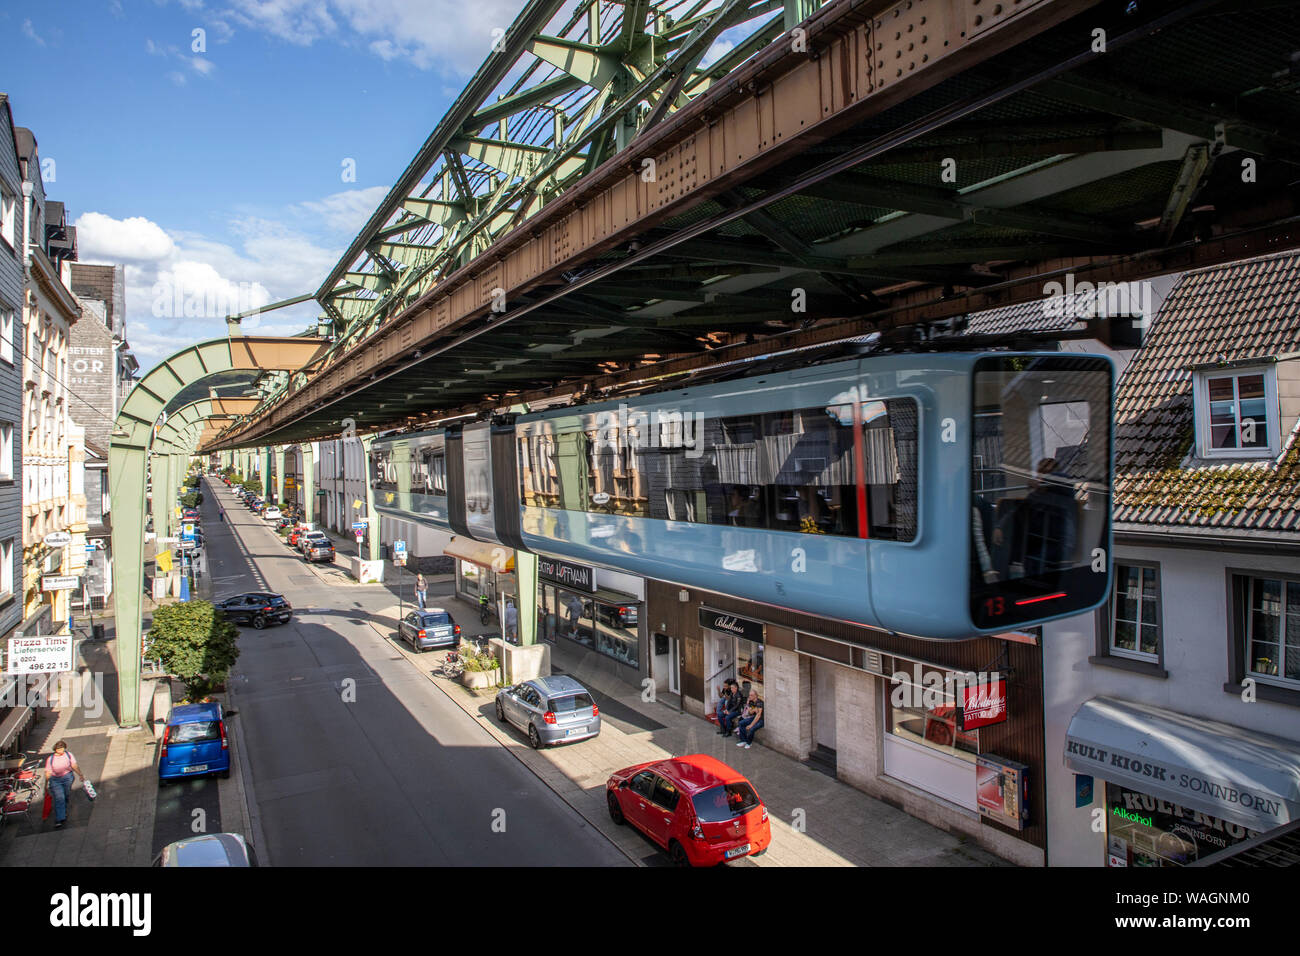 The Wuppertal suspension railway, train of the latest generation 15, Wuppertal, Germany, Sonnborner Strasse, Street, Stock Photo